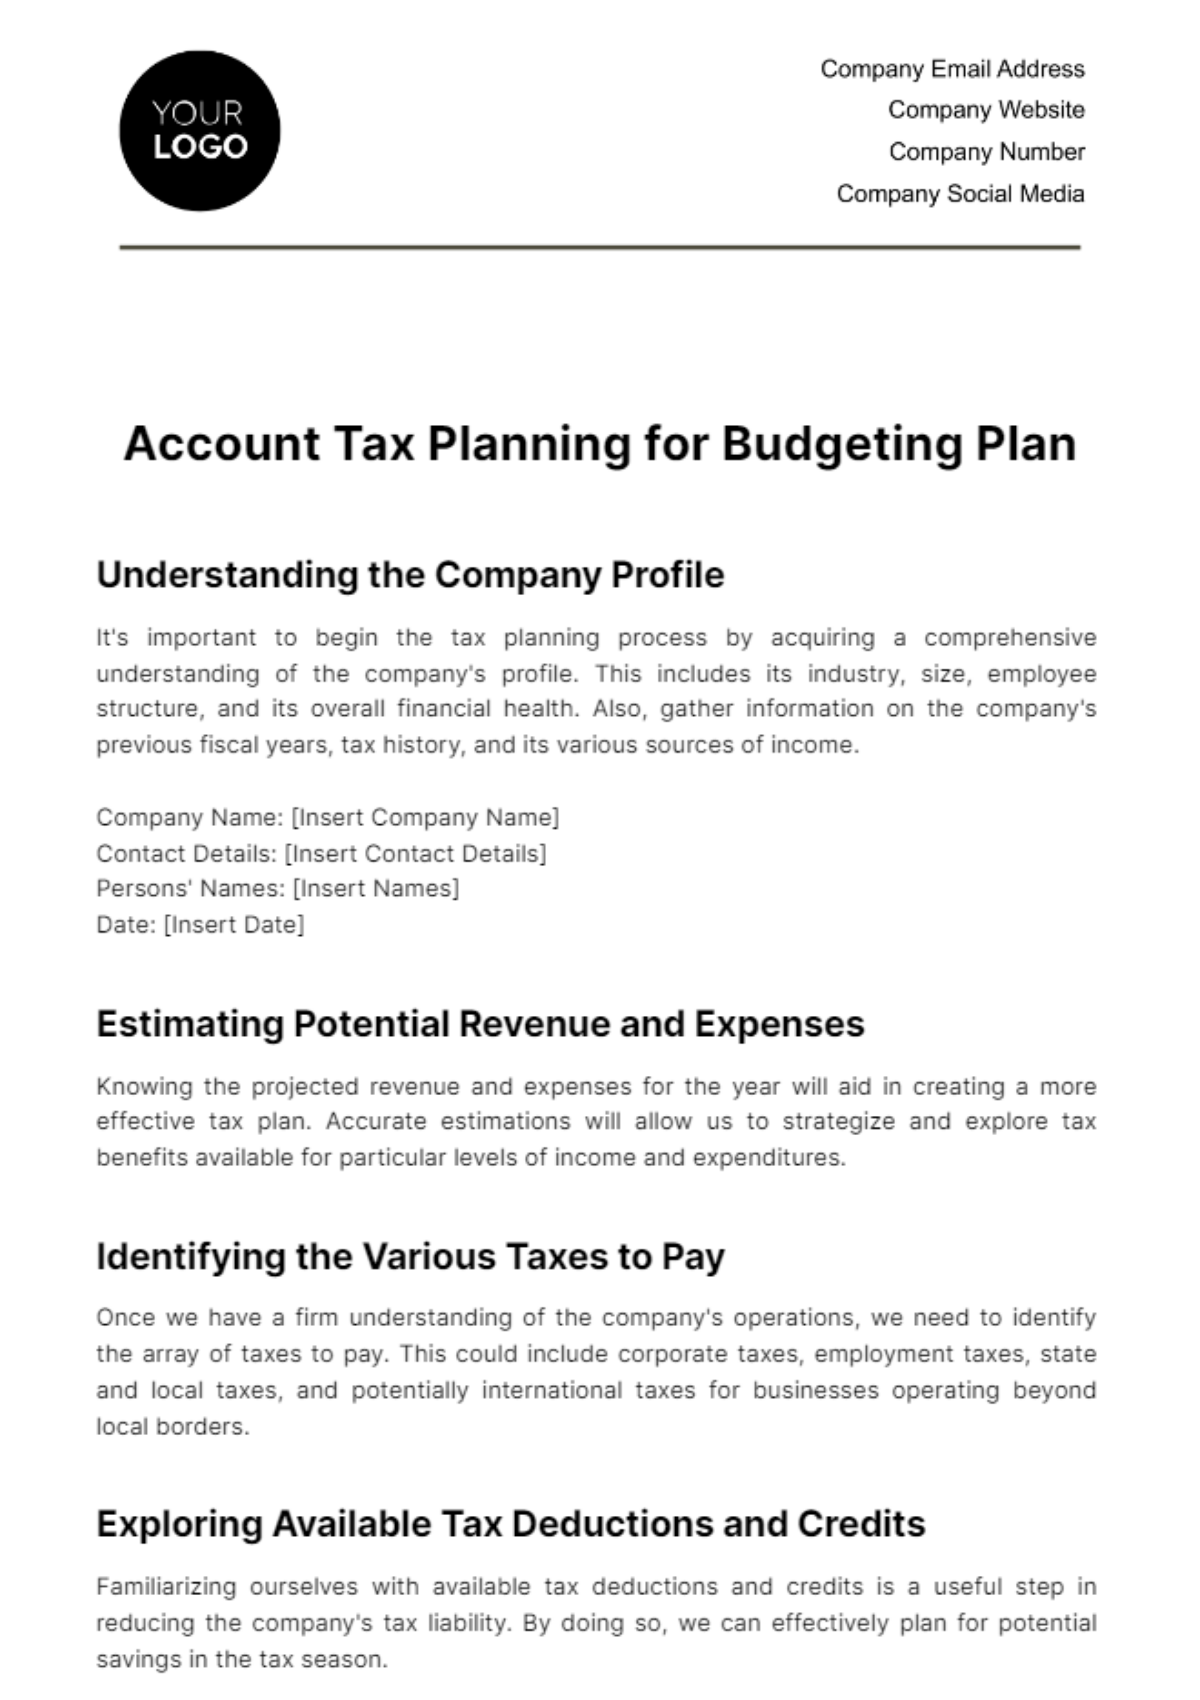 Free Account Tax Planning for Budgeting Template